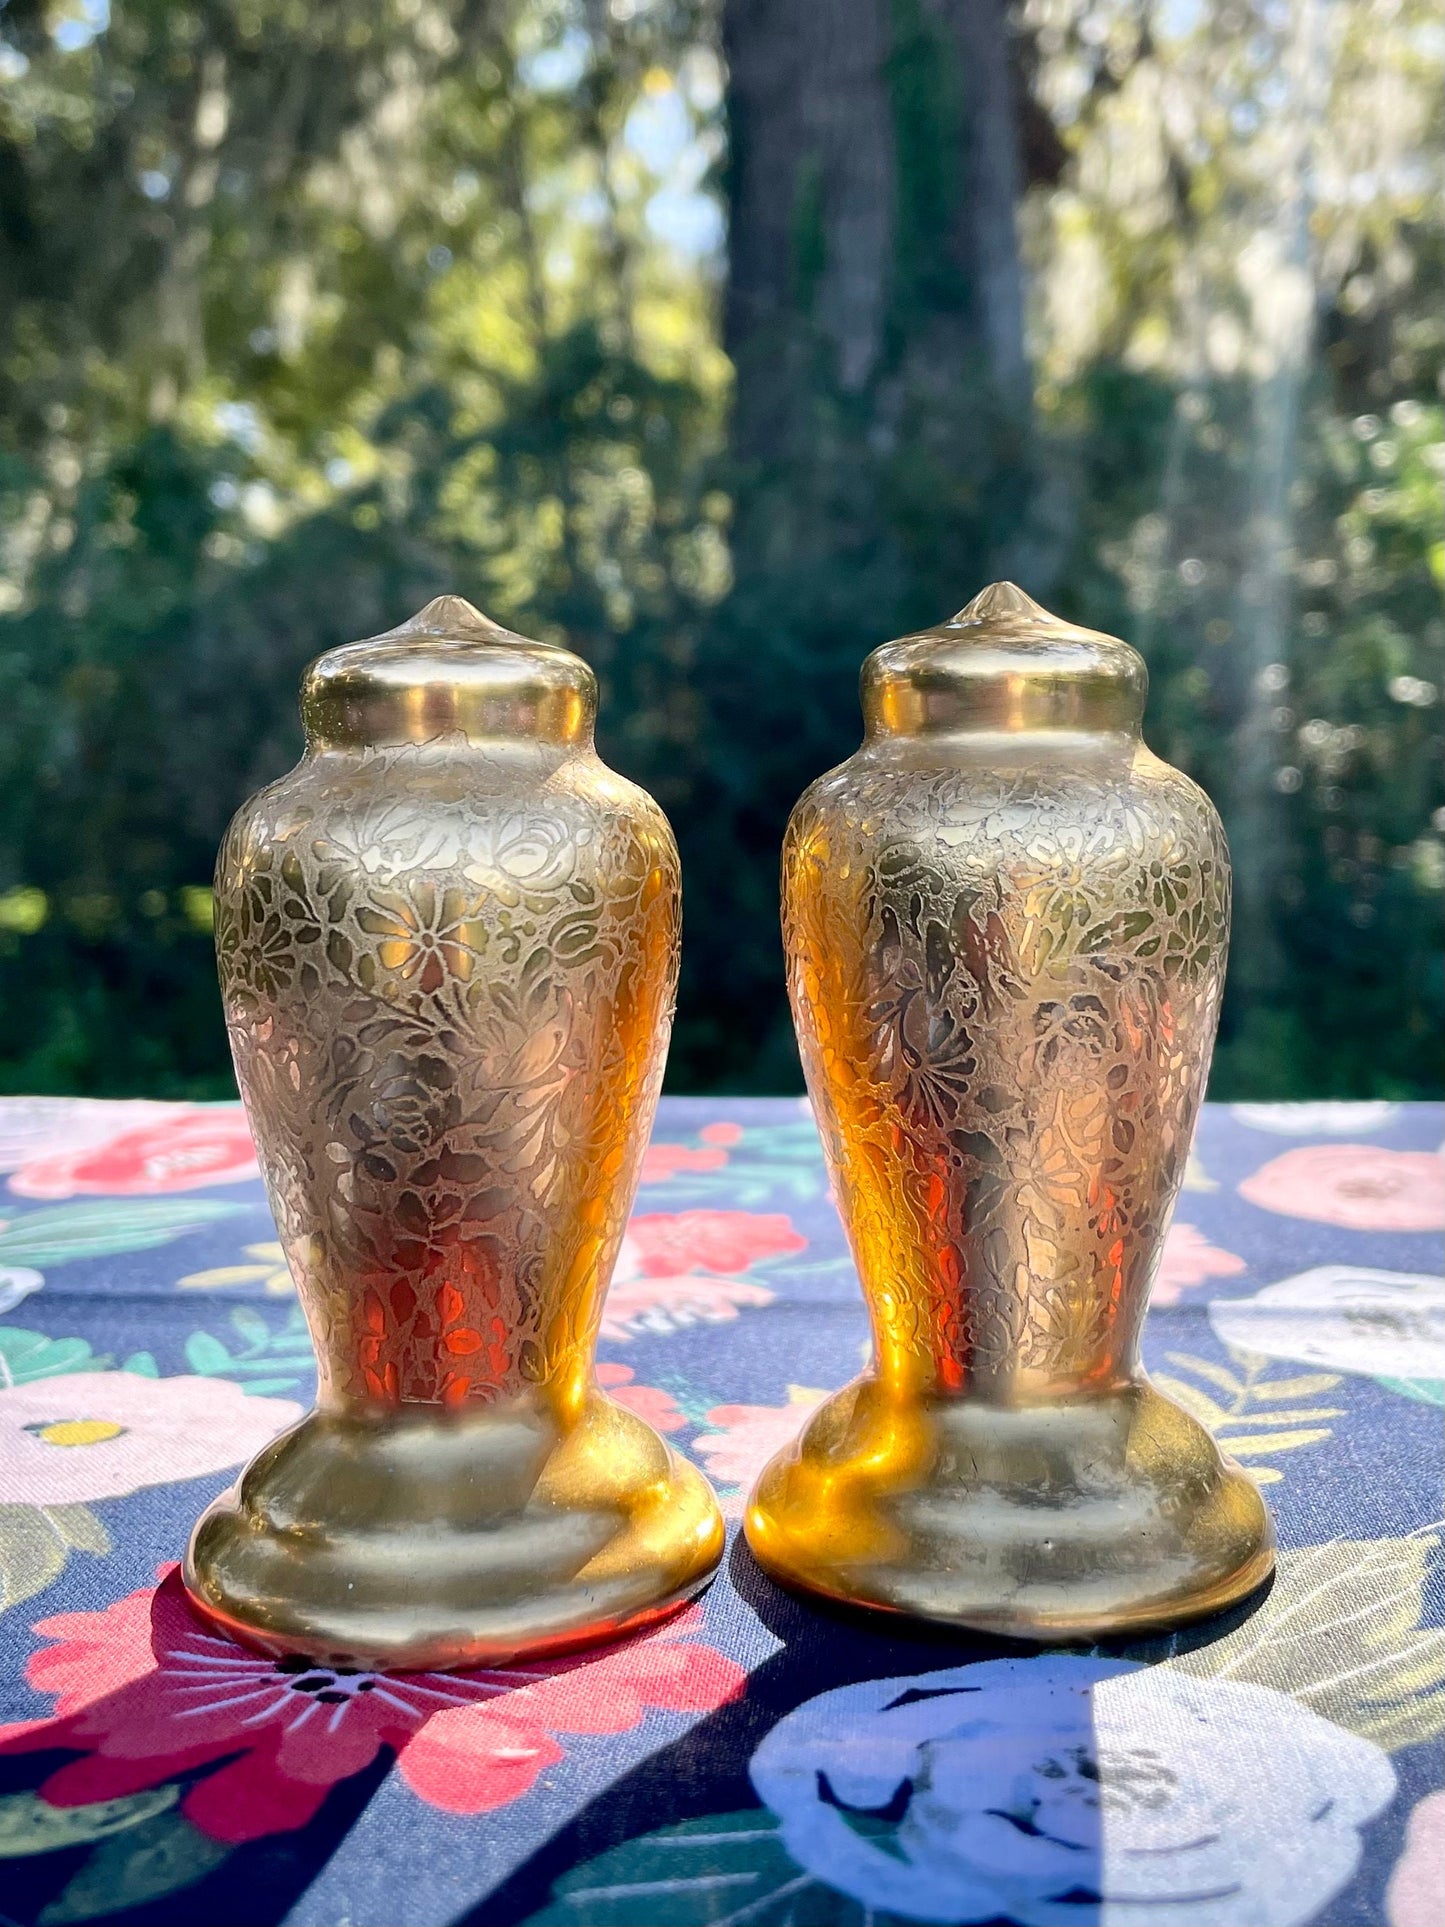 Vintage Gold & White Salt and Pepper Shakers, Fancy Salt and Pepper Shakers